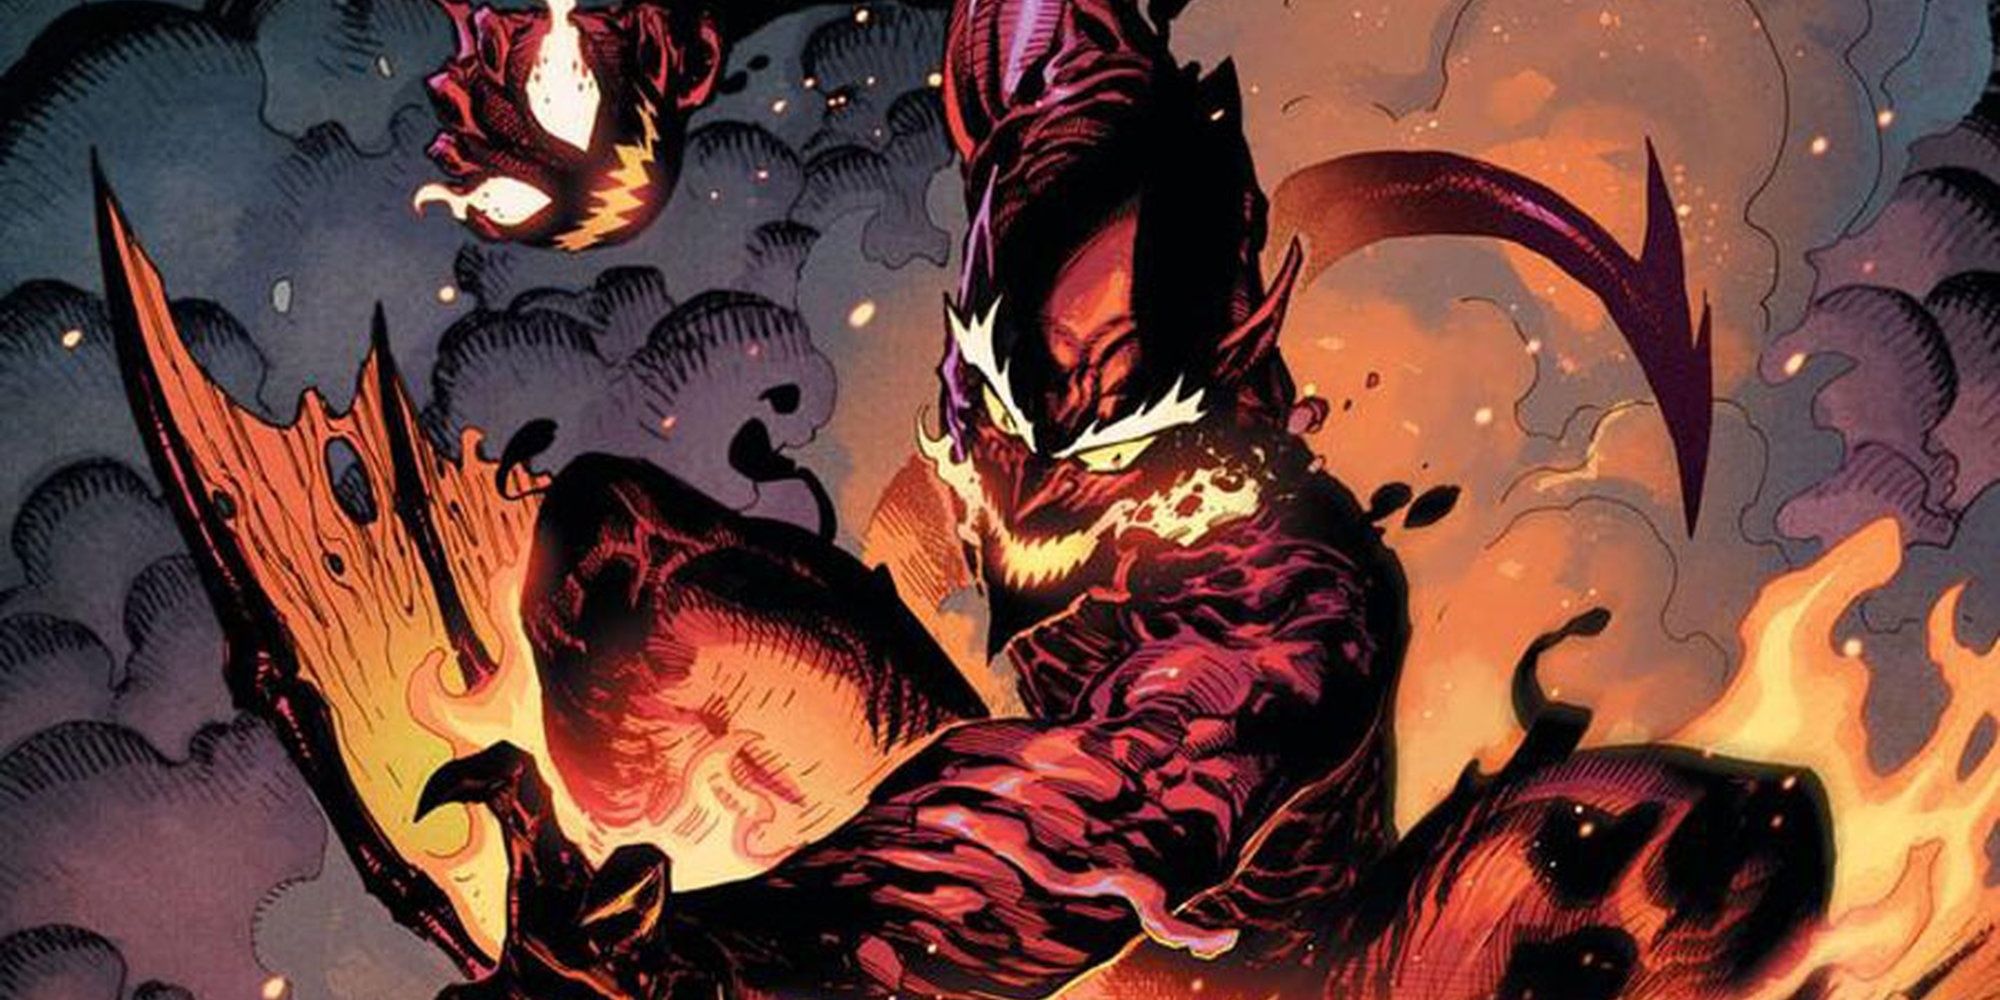 Norman Osborn and the Carnage symbiote as Red Goblin in front of smoke and fire